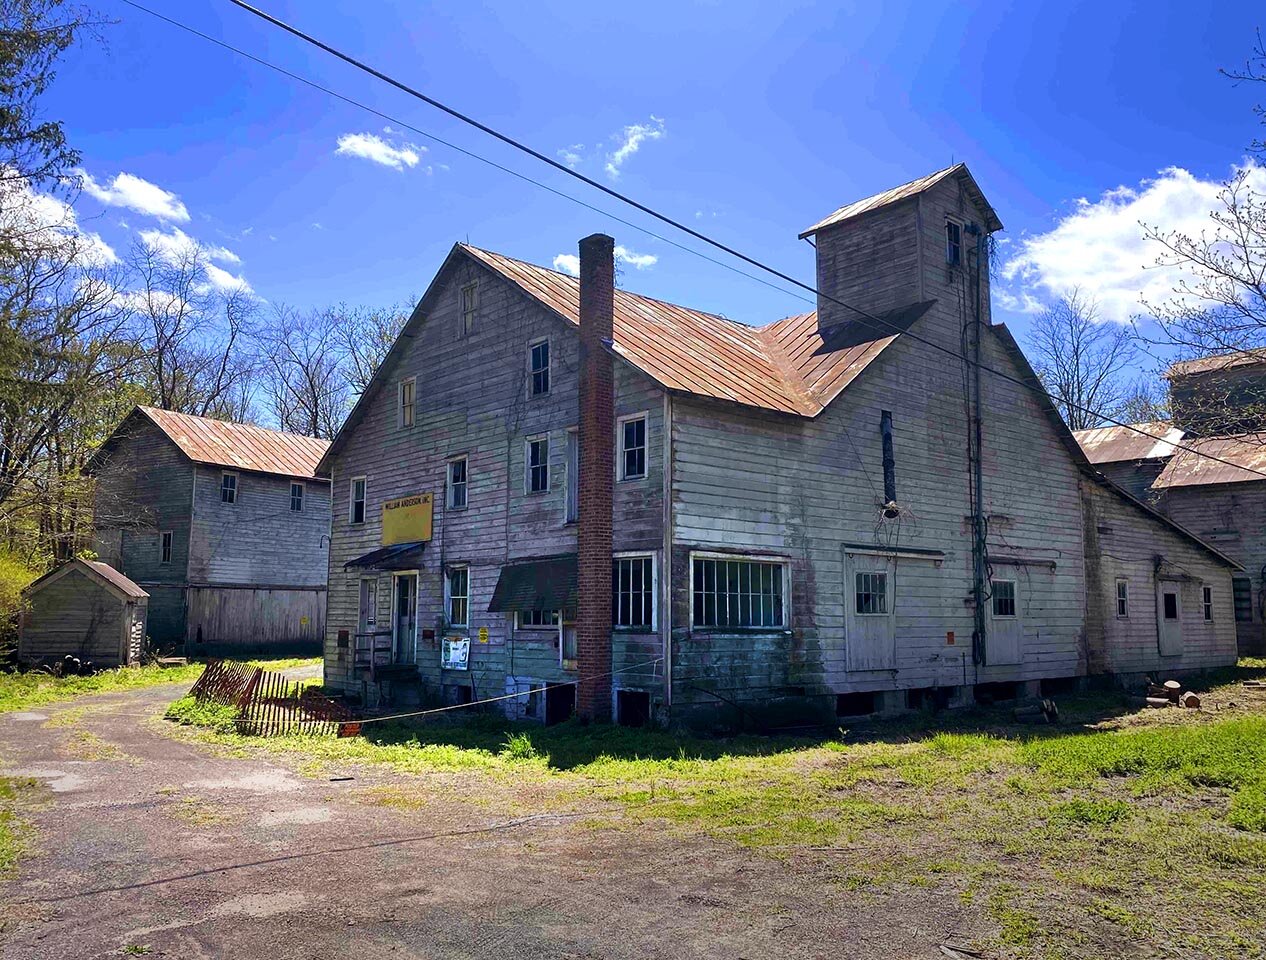 Exterior view of a wooden-sided barn building. It is part of the Anderson feed mill complex in Accord, New York.